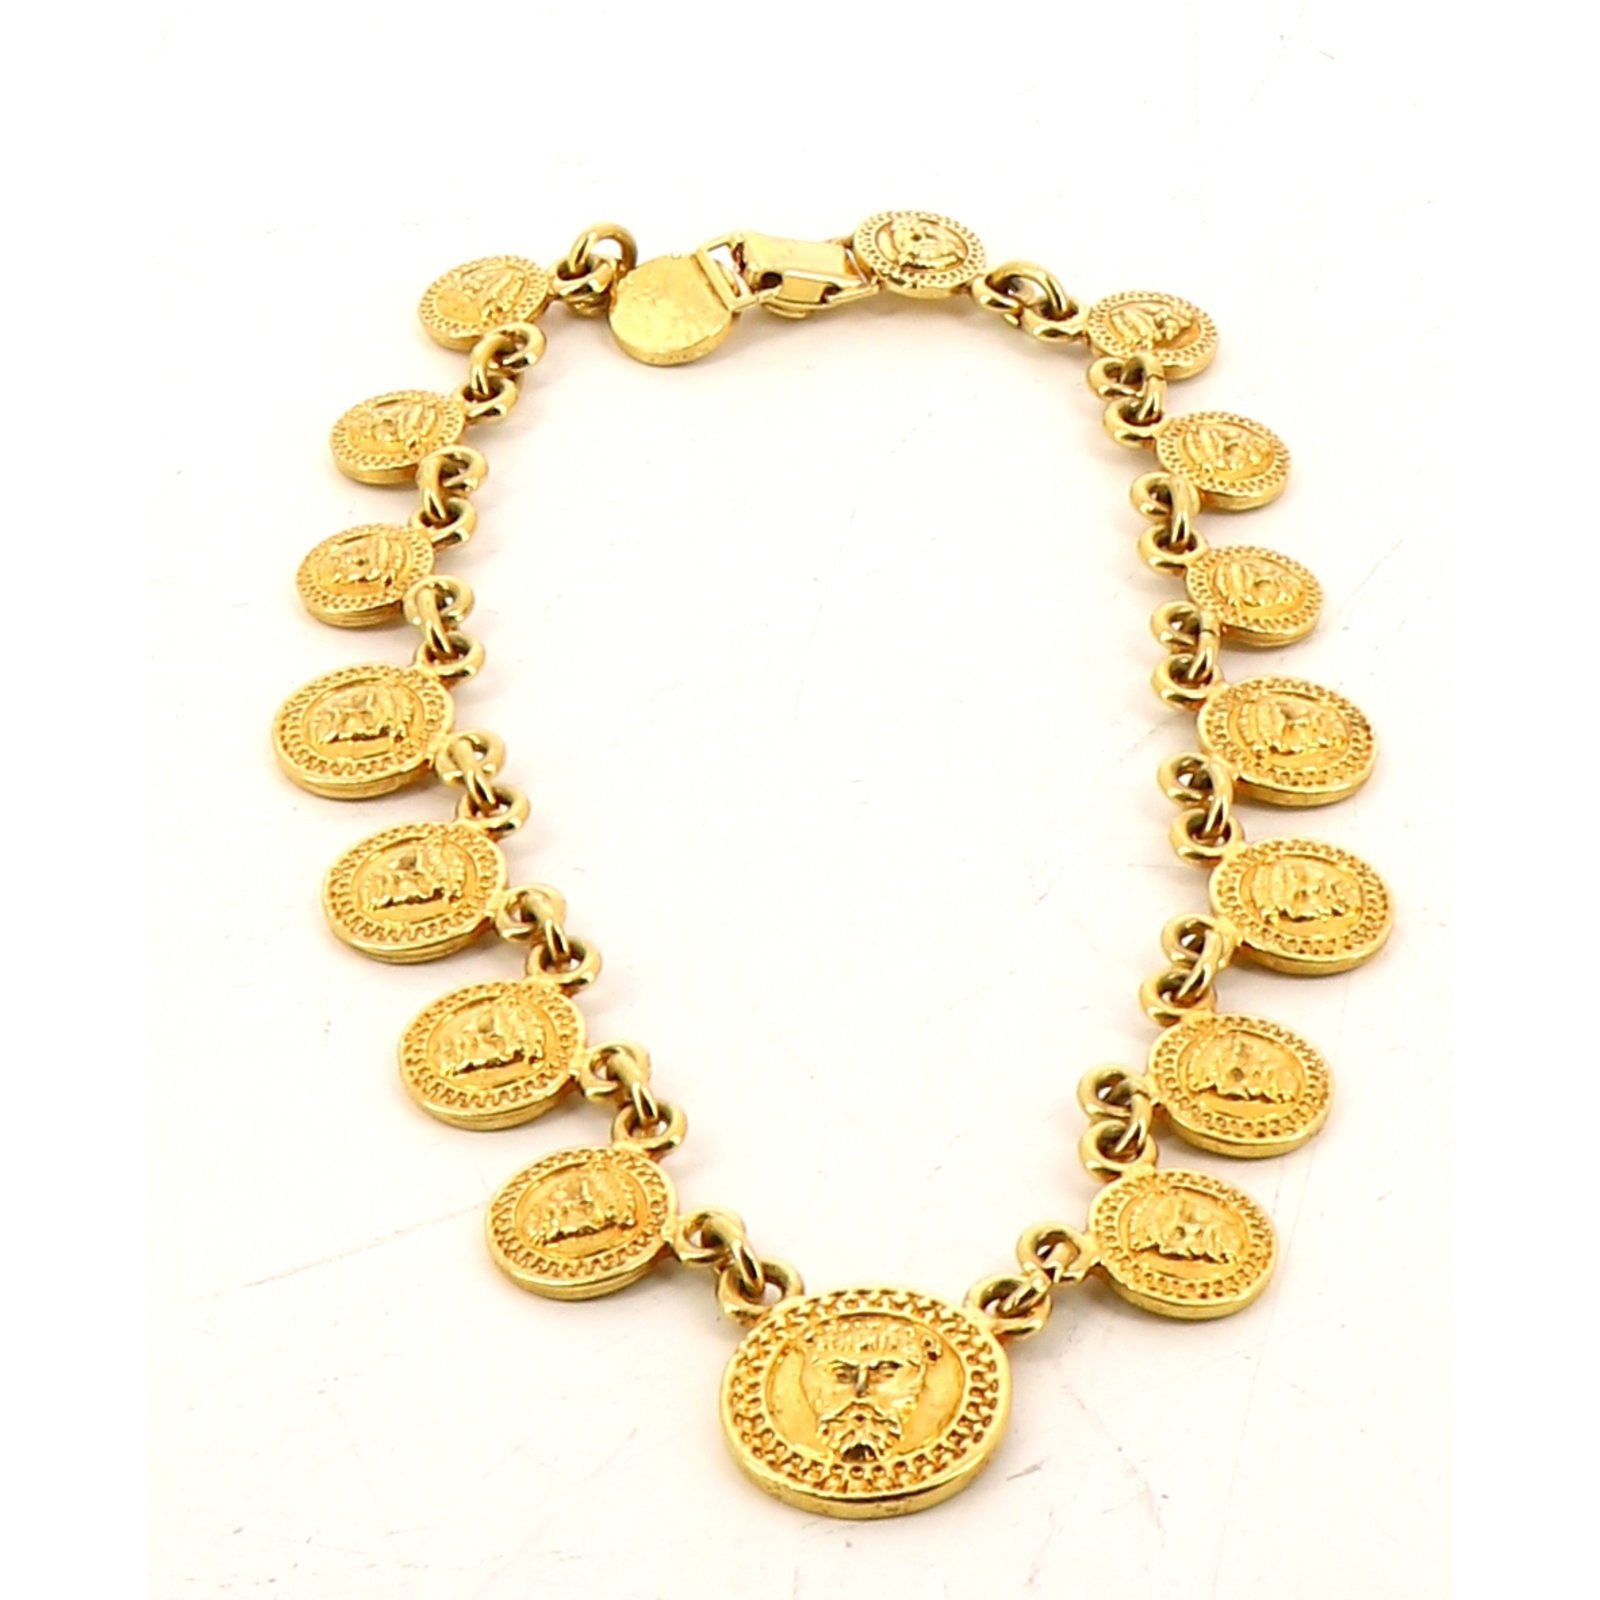 gianni versace necklace